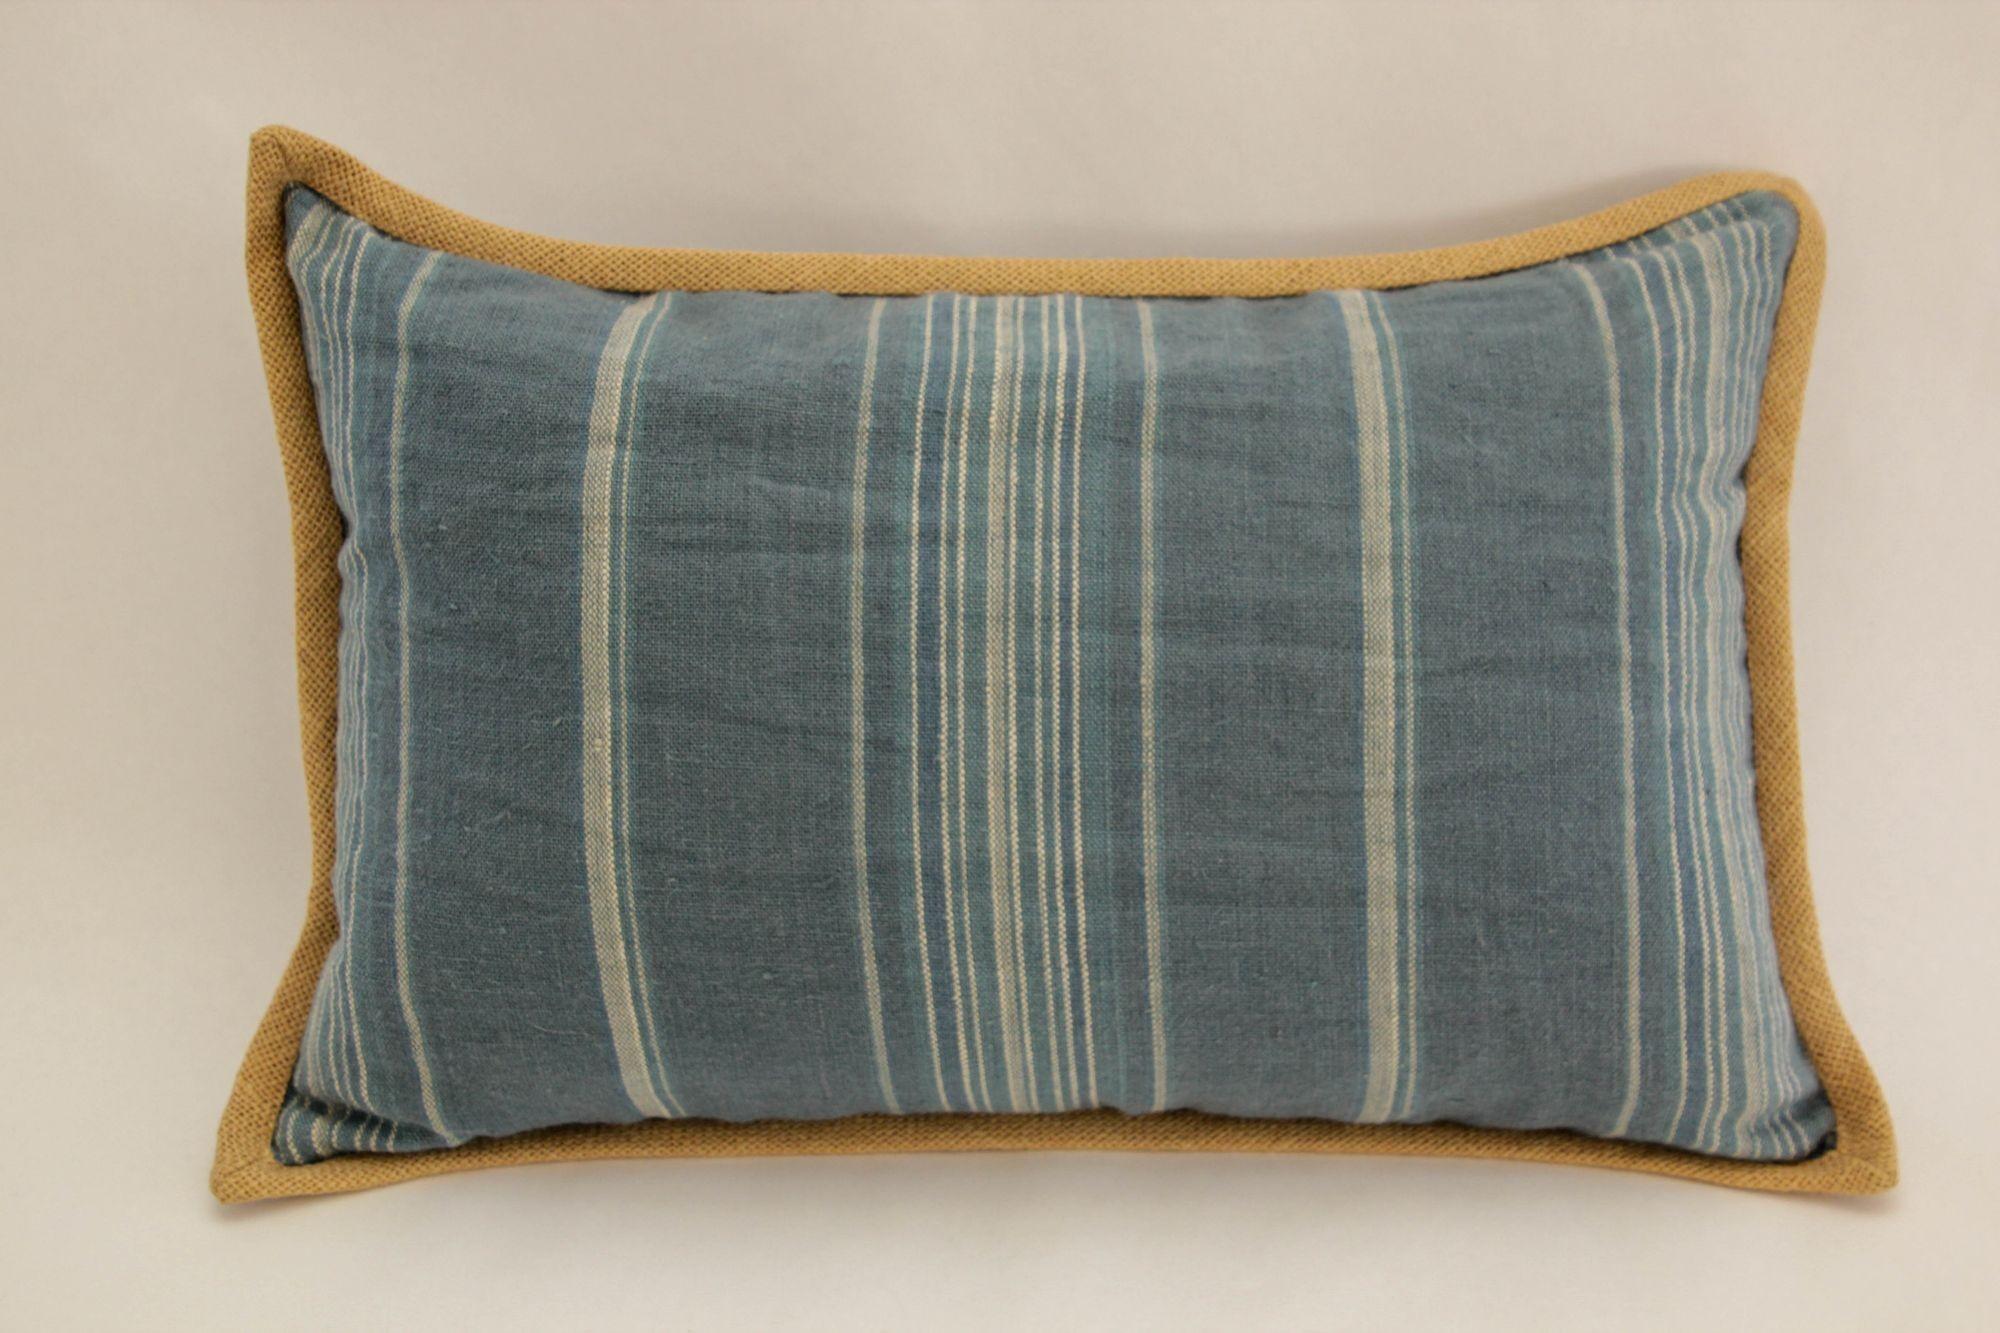 Ralph Lauren decorative blue and white stripe linen lumbar pillow blue fabric.
This rectangular throw decorative lumbar pillow will add a touch of timeless texture to your decor.
Perfect addition to your home decor, it features a navy fabric with